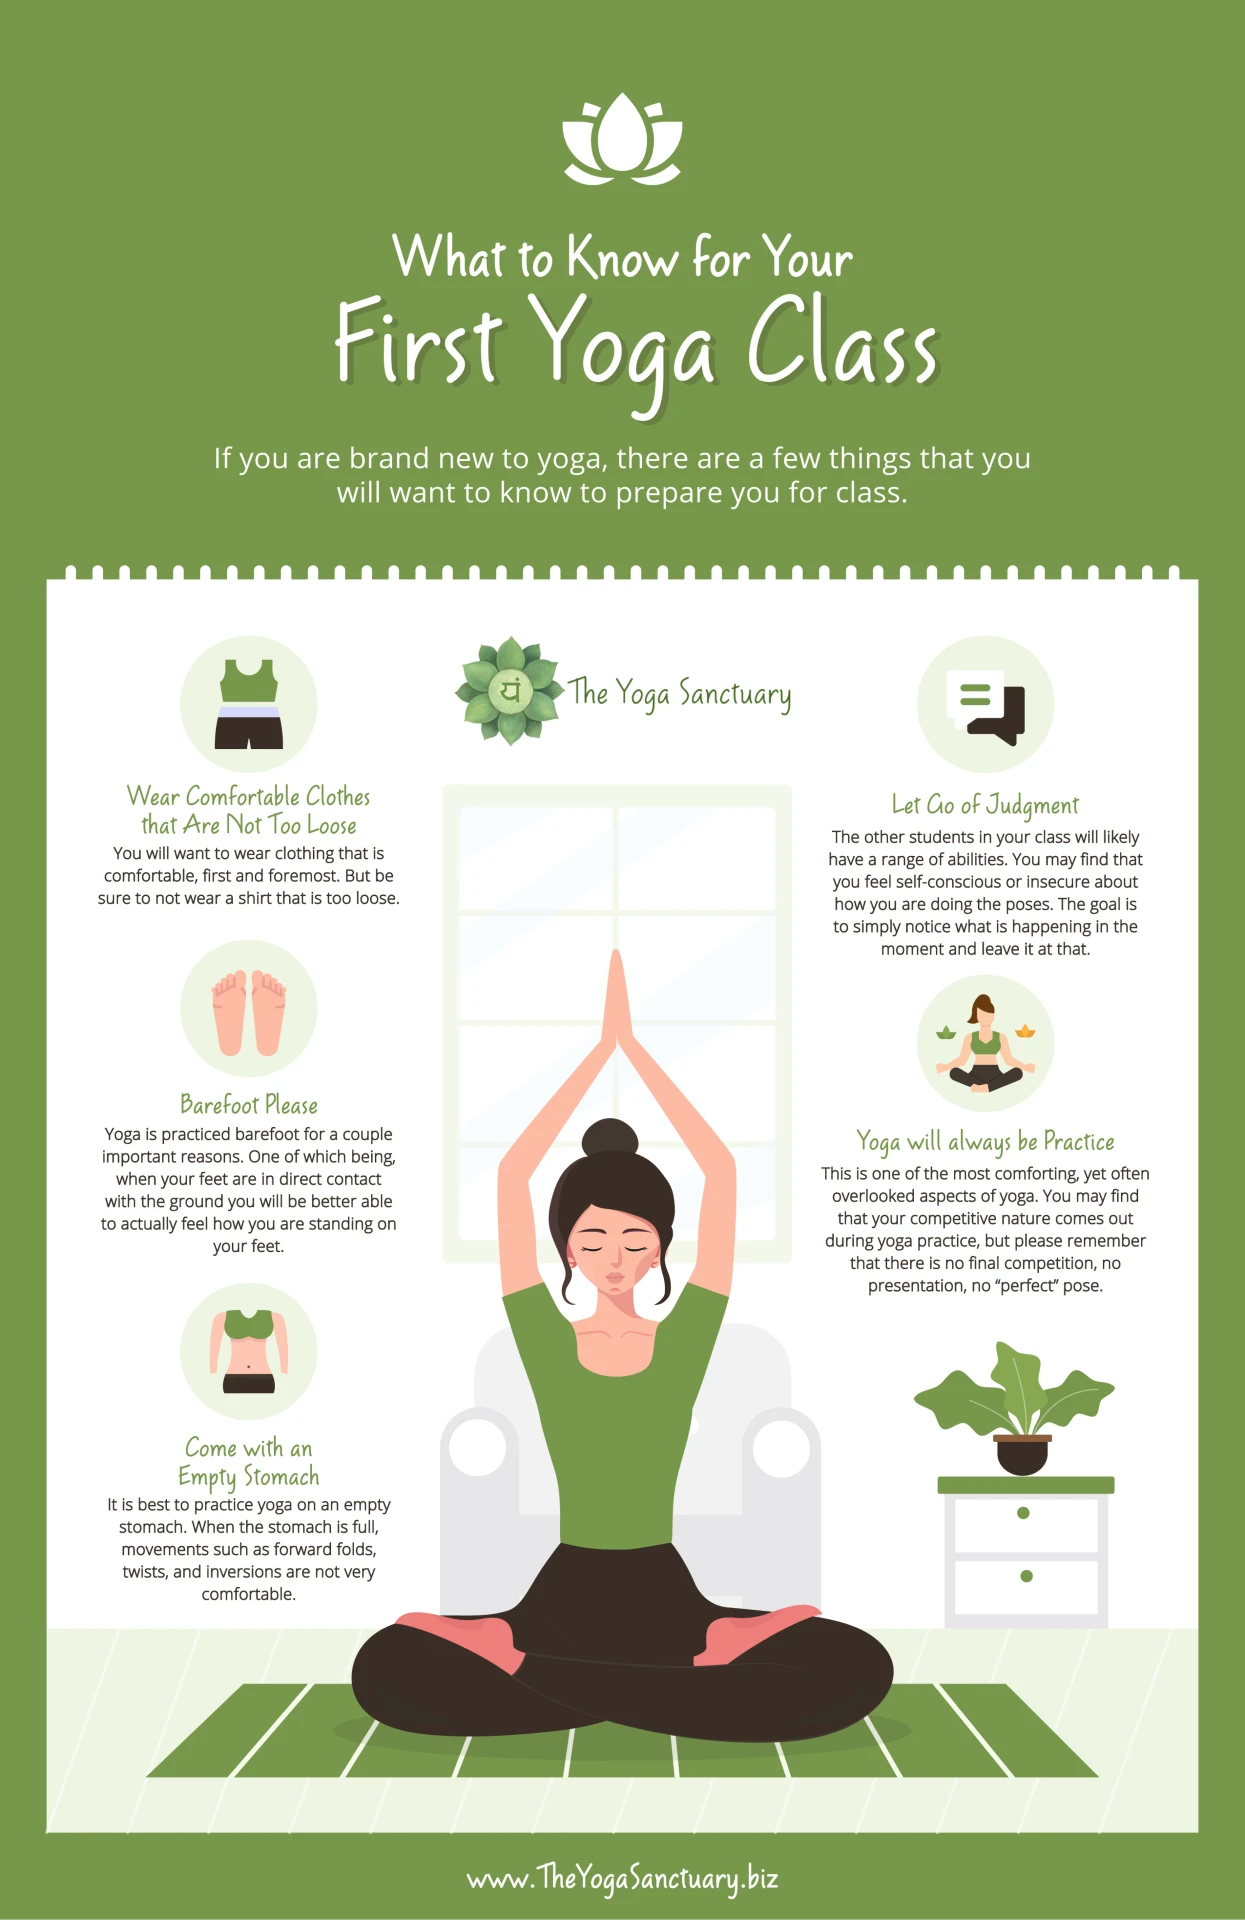 Now to Yoga Package: How to begin your Yoga Journey